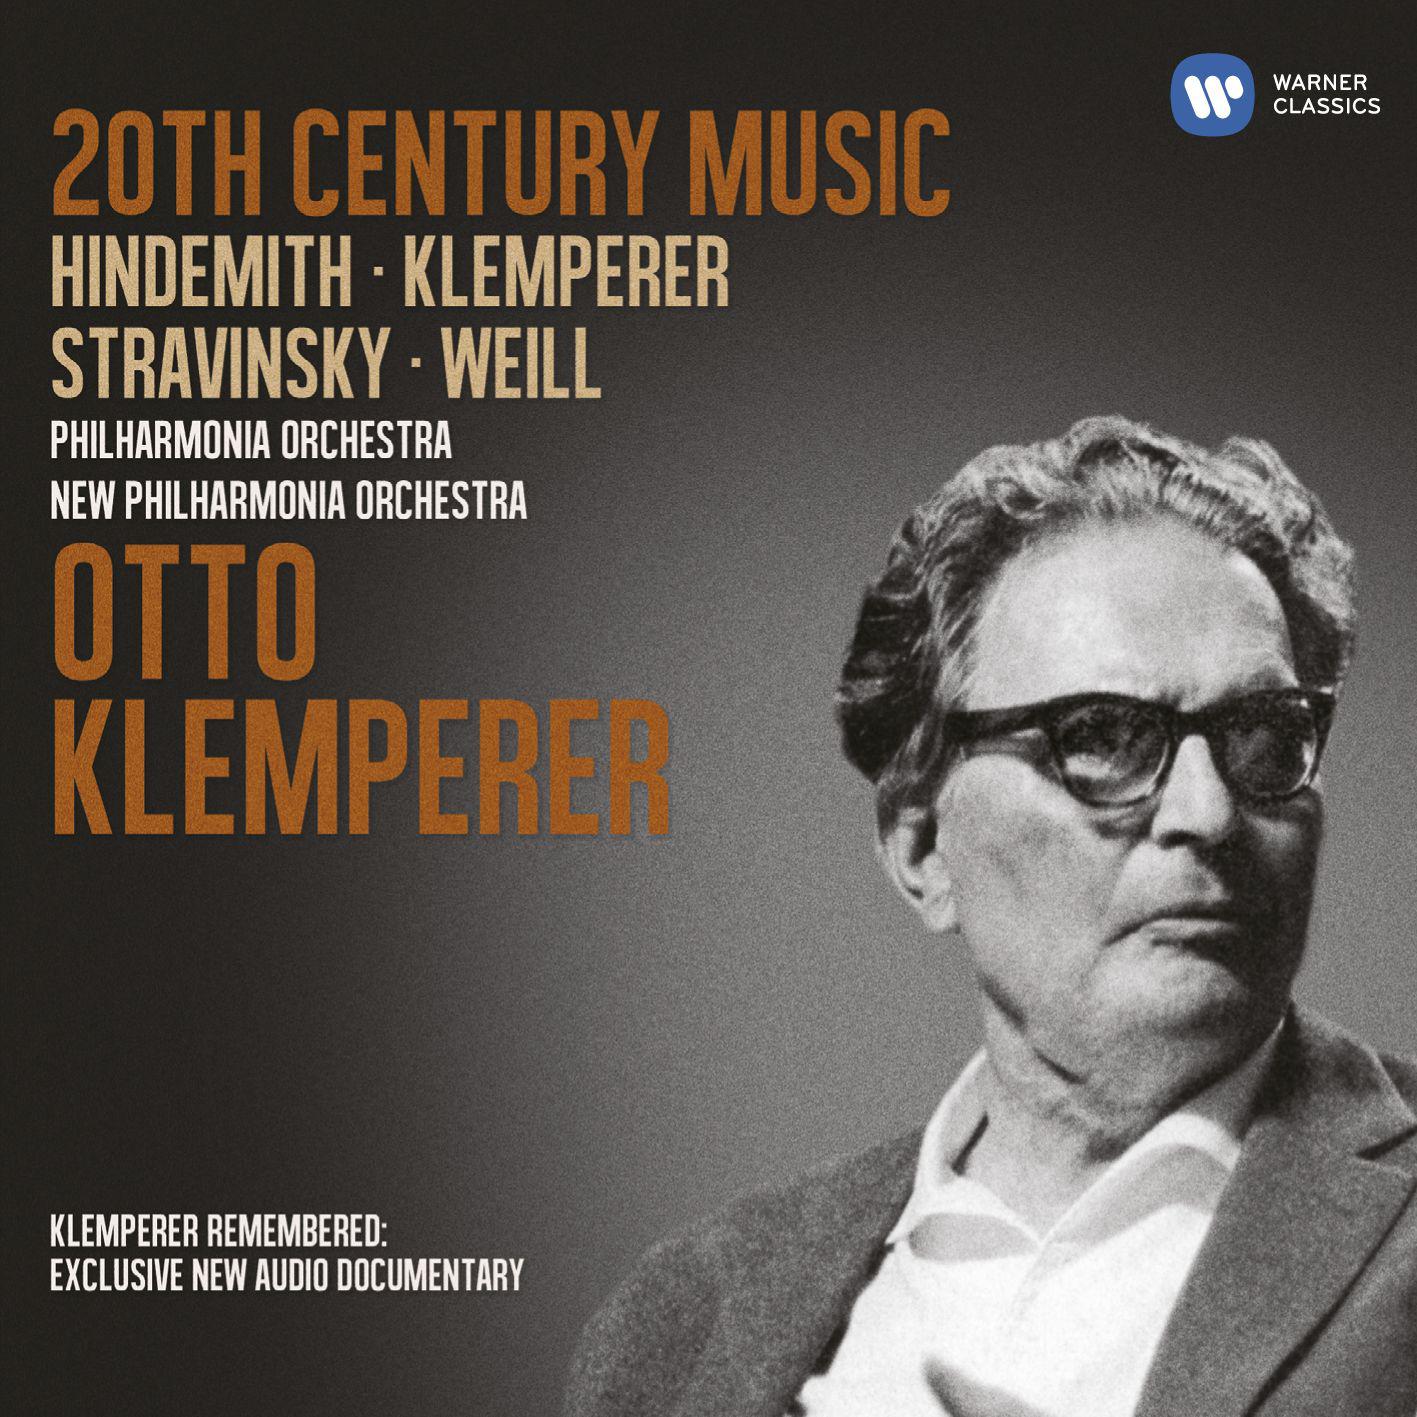 Otto Klemperer:A Biographical Memoir: Introduction- Career summary